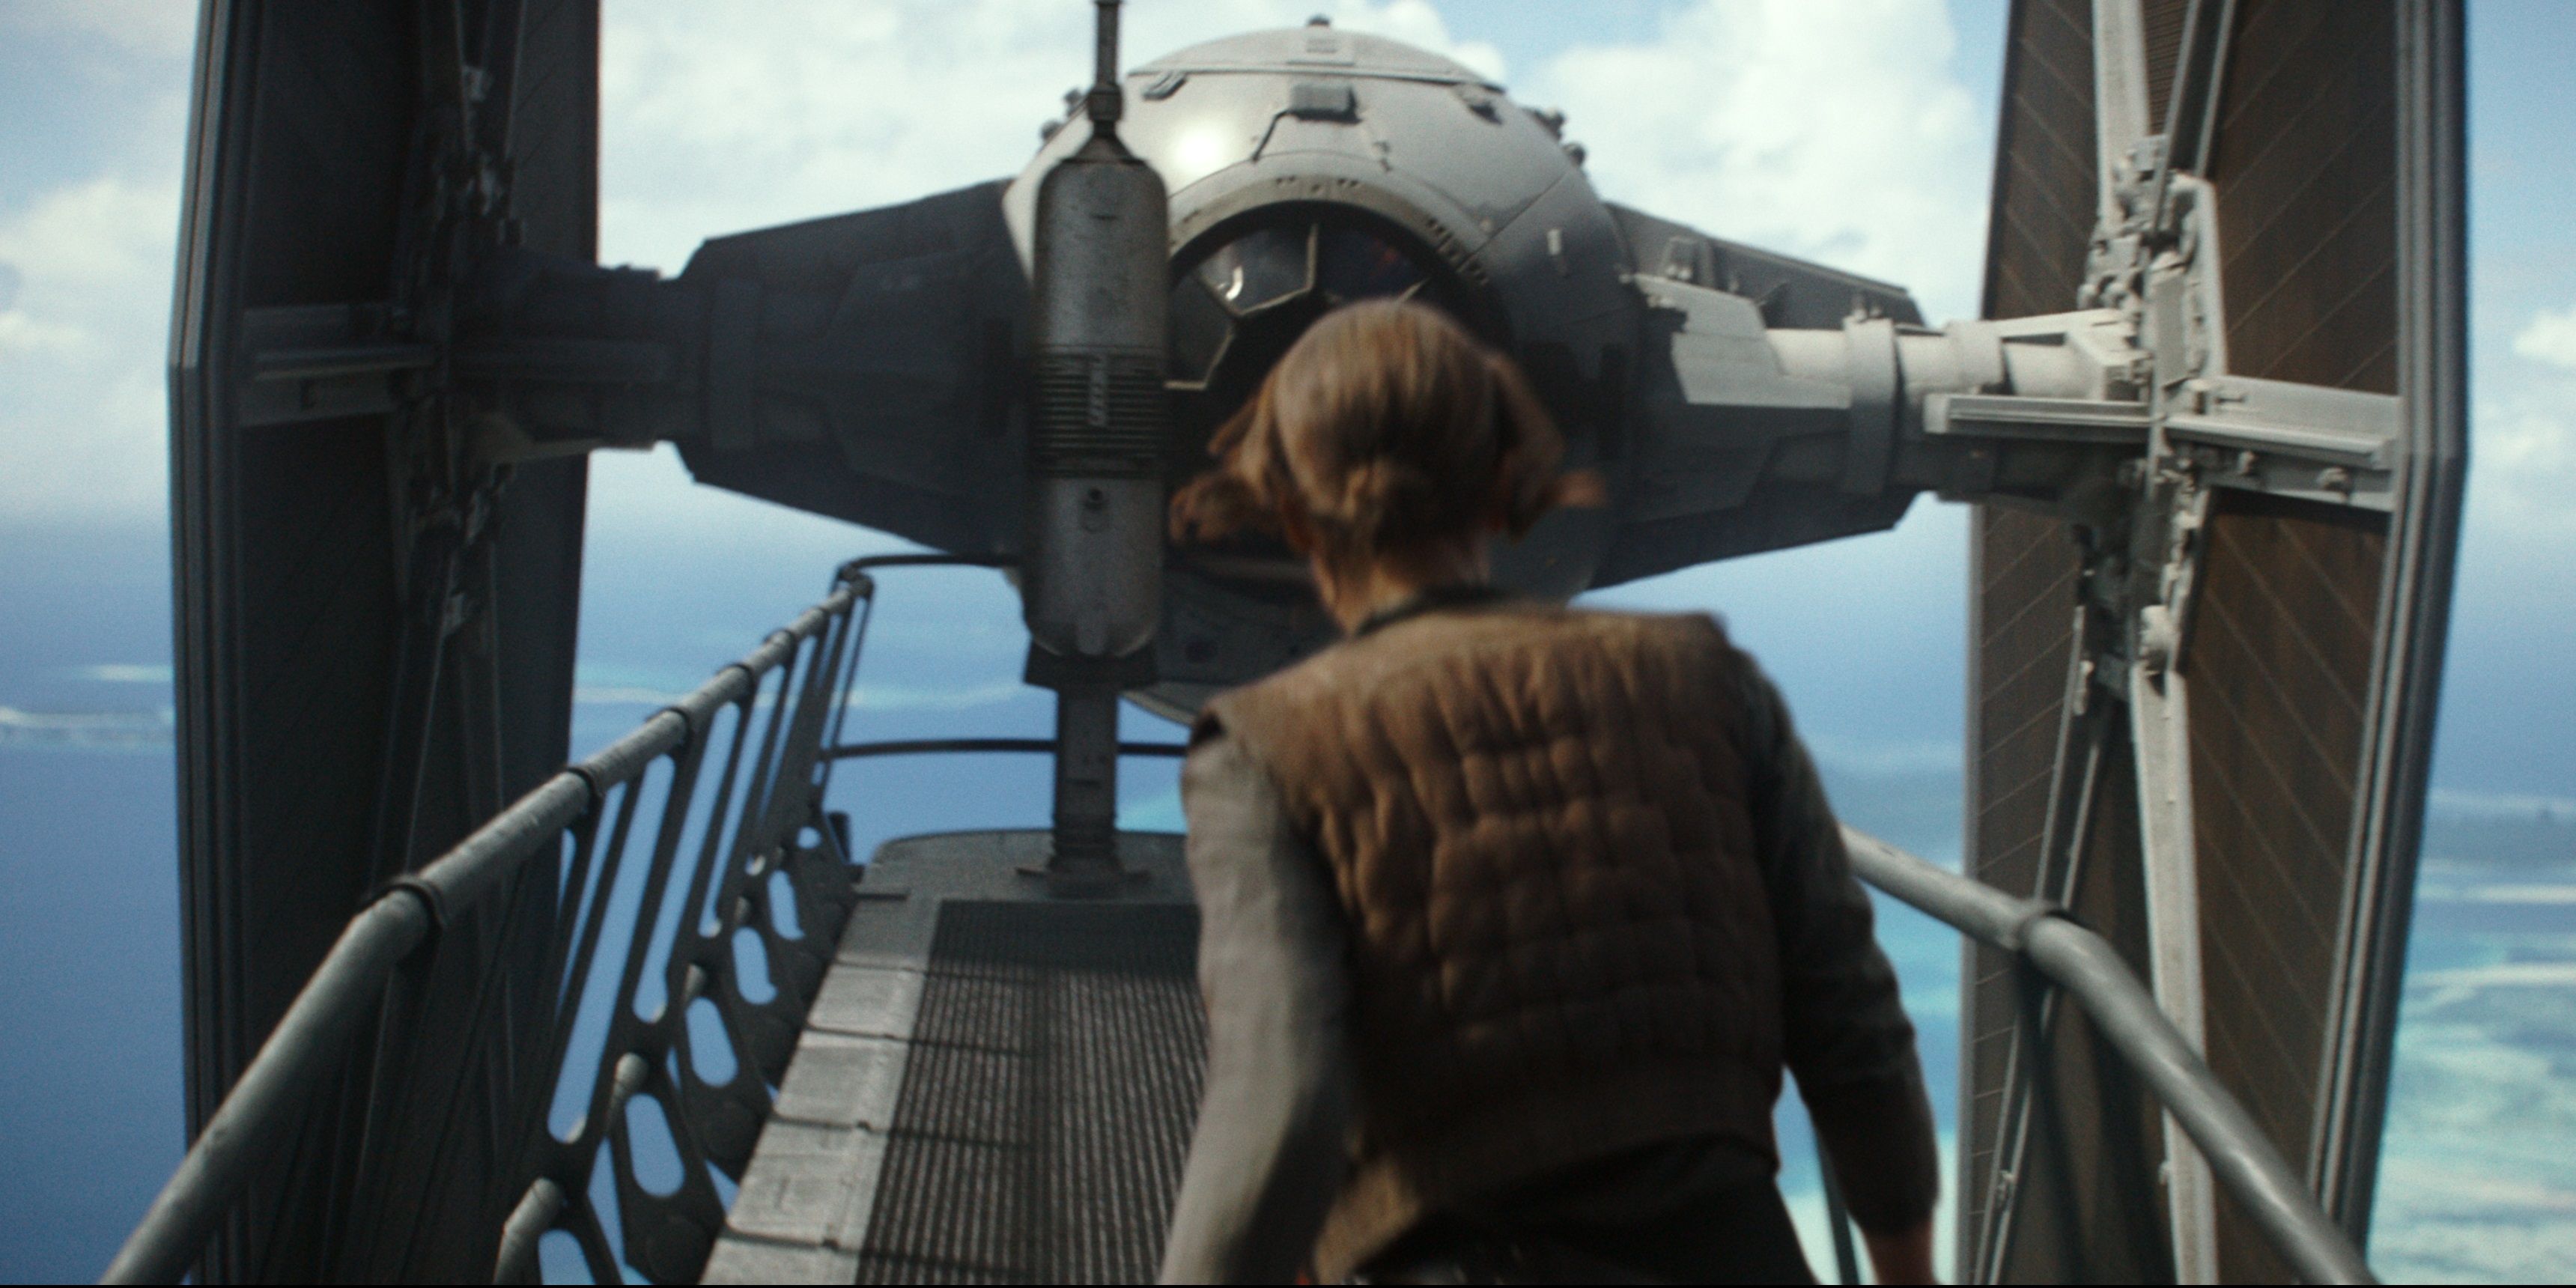 Jyn faces down a TIE fighter in the Rogue One trailer